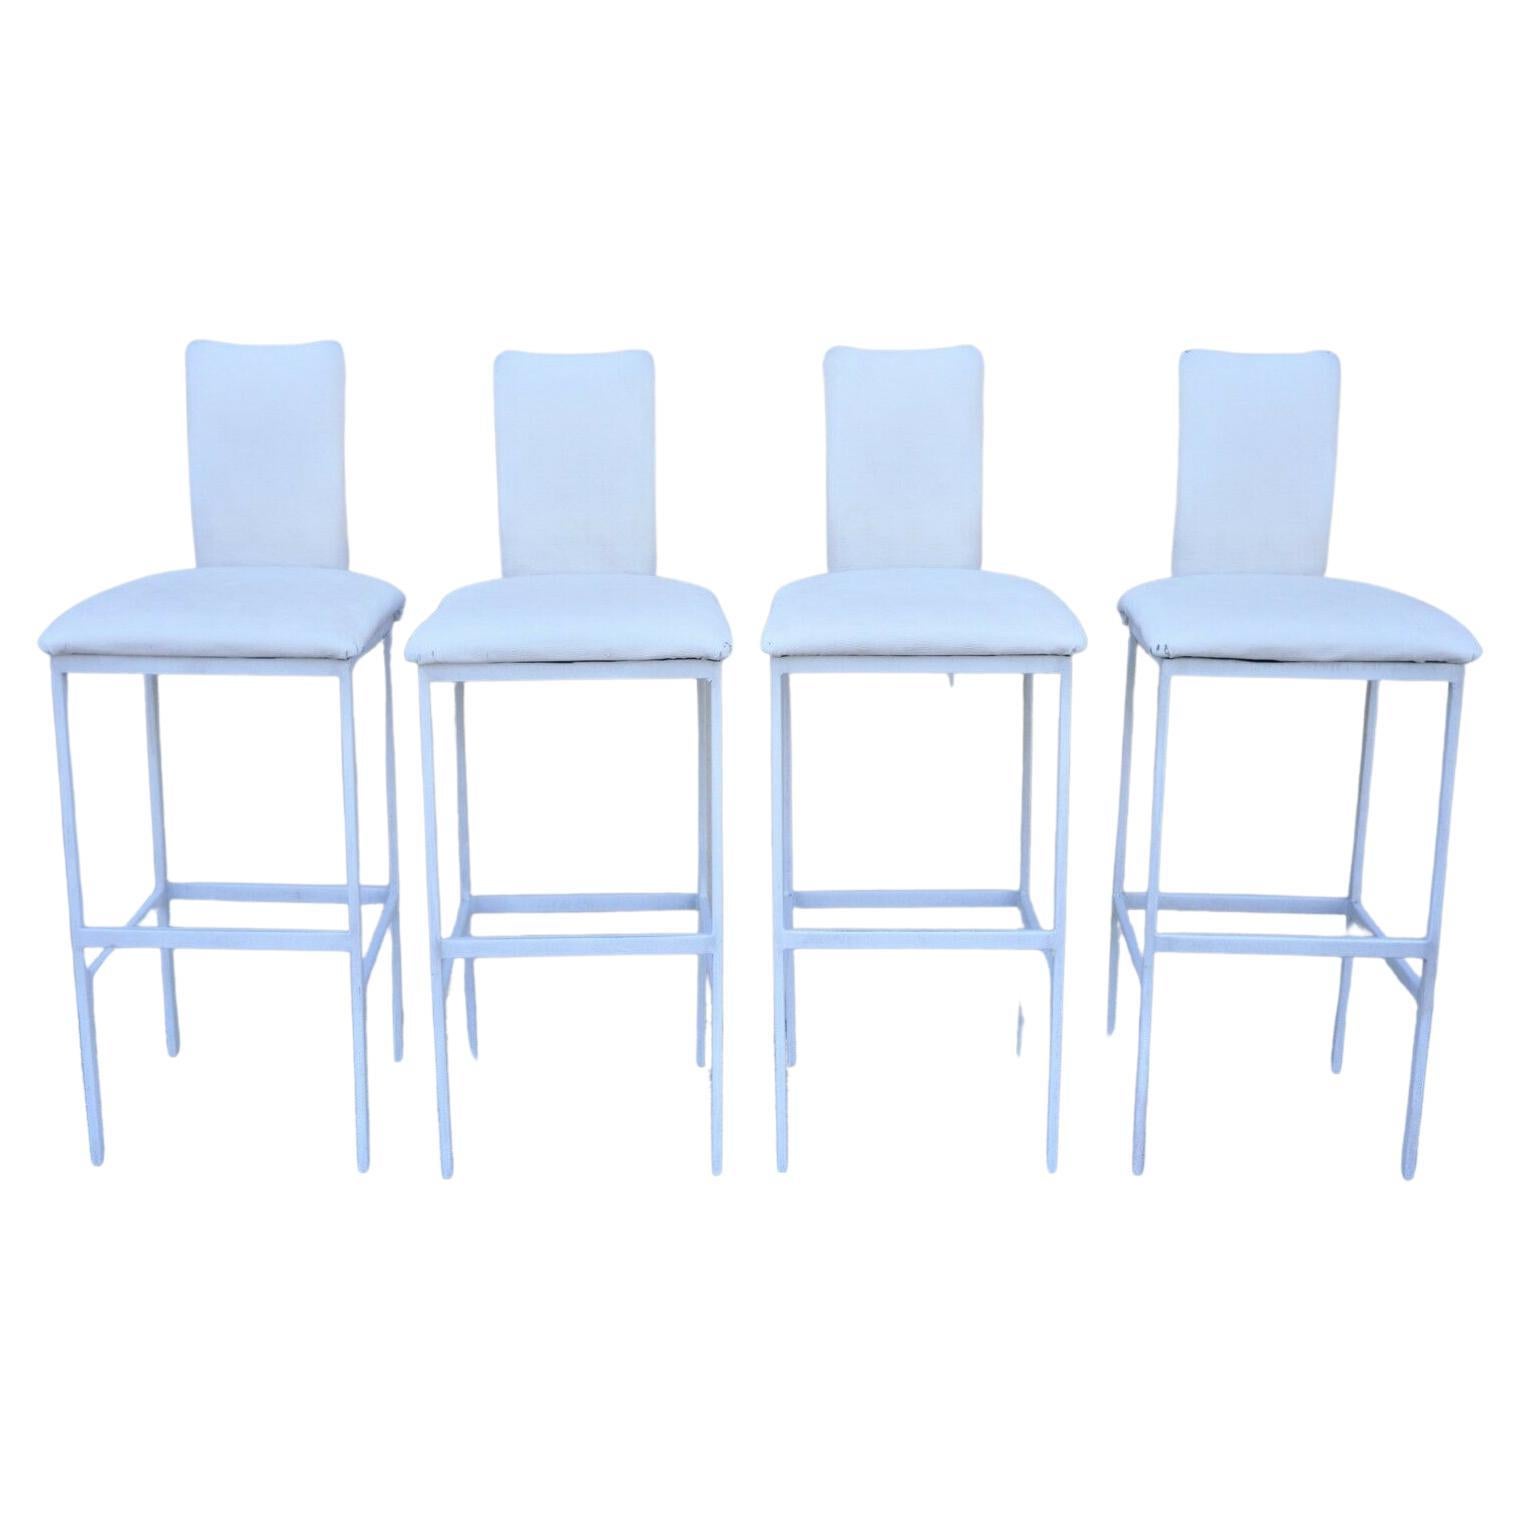 Minson Ent. Contemporary Modern White Metal Sculpted Barstools Chair - Set of 4